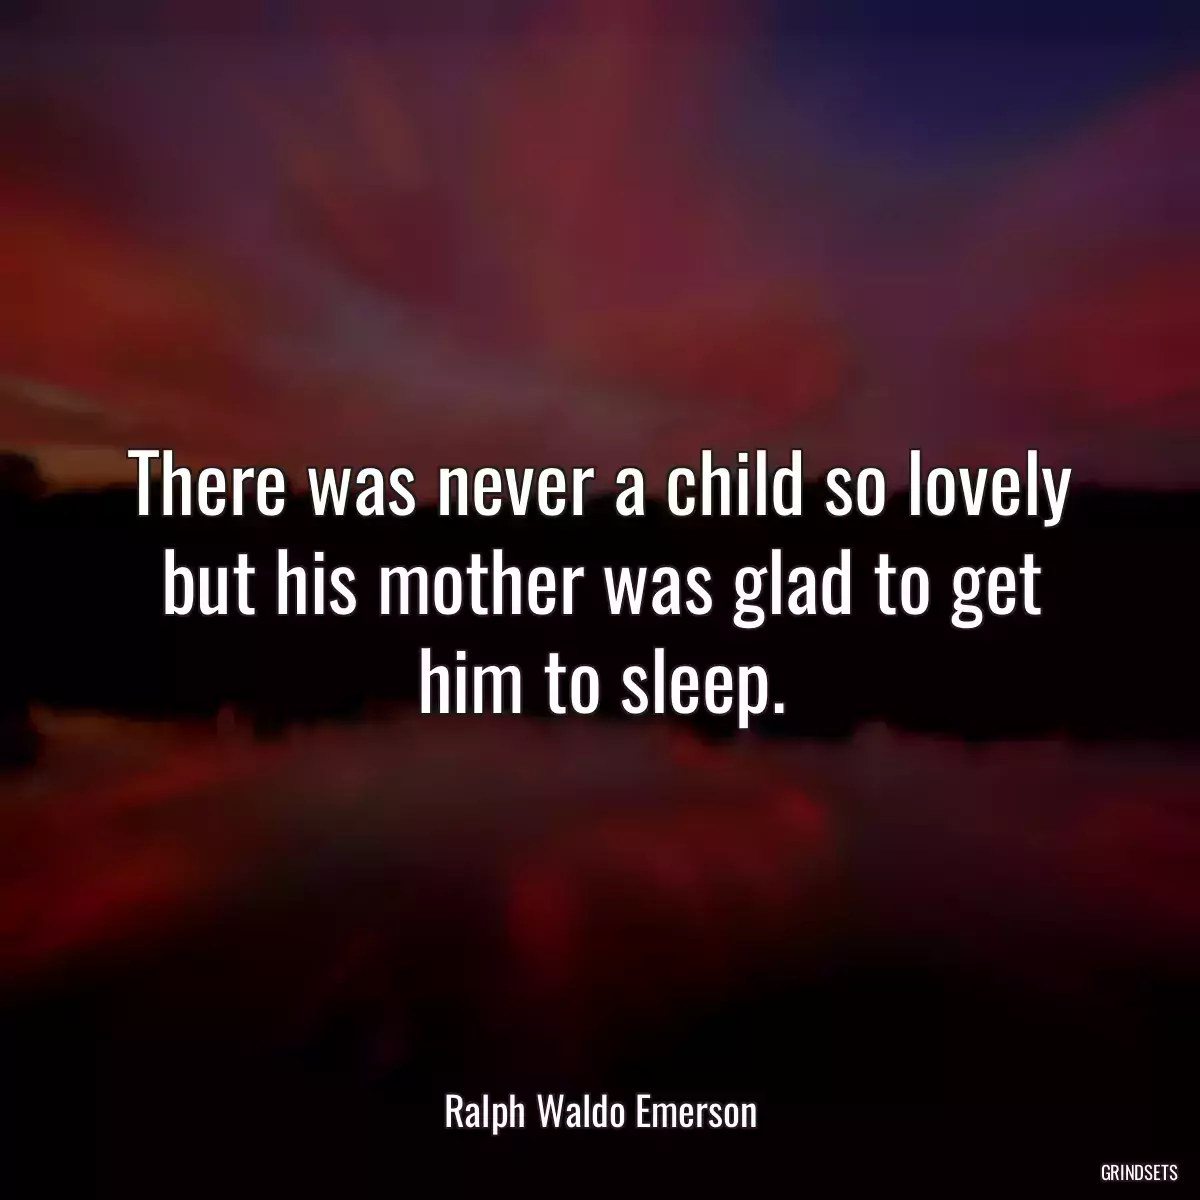 There was never a child so lovely but his mother was glad to get him to sleep.